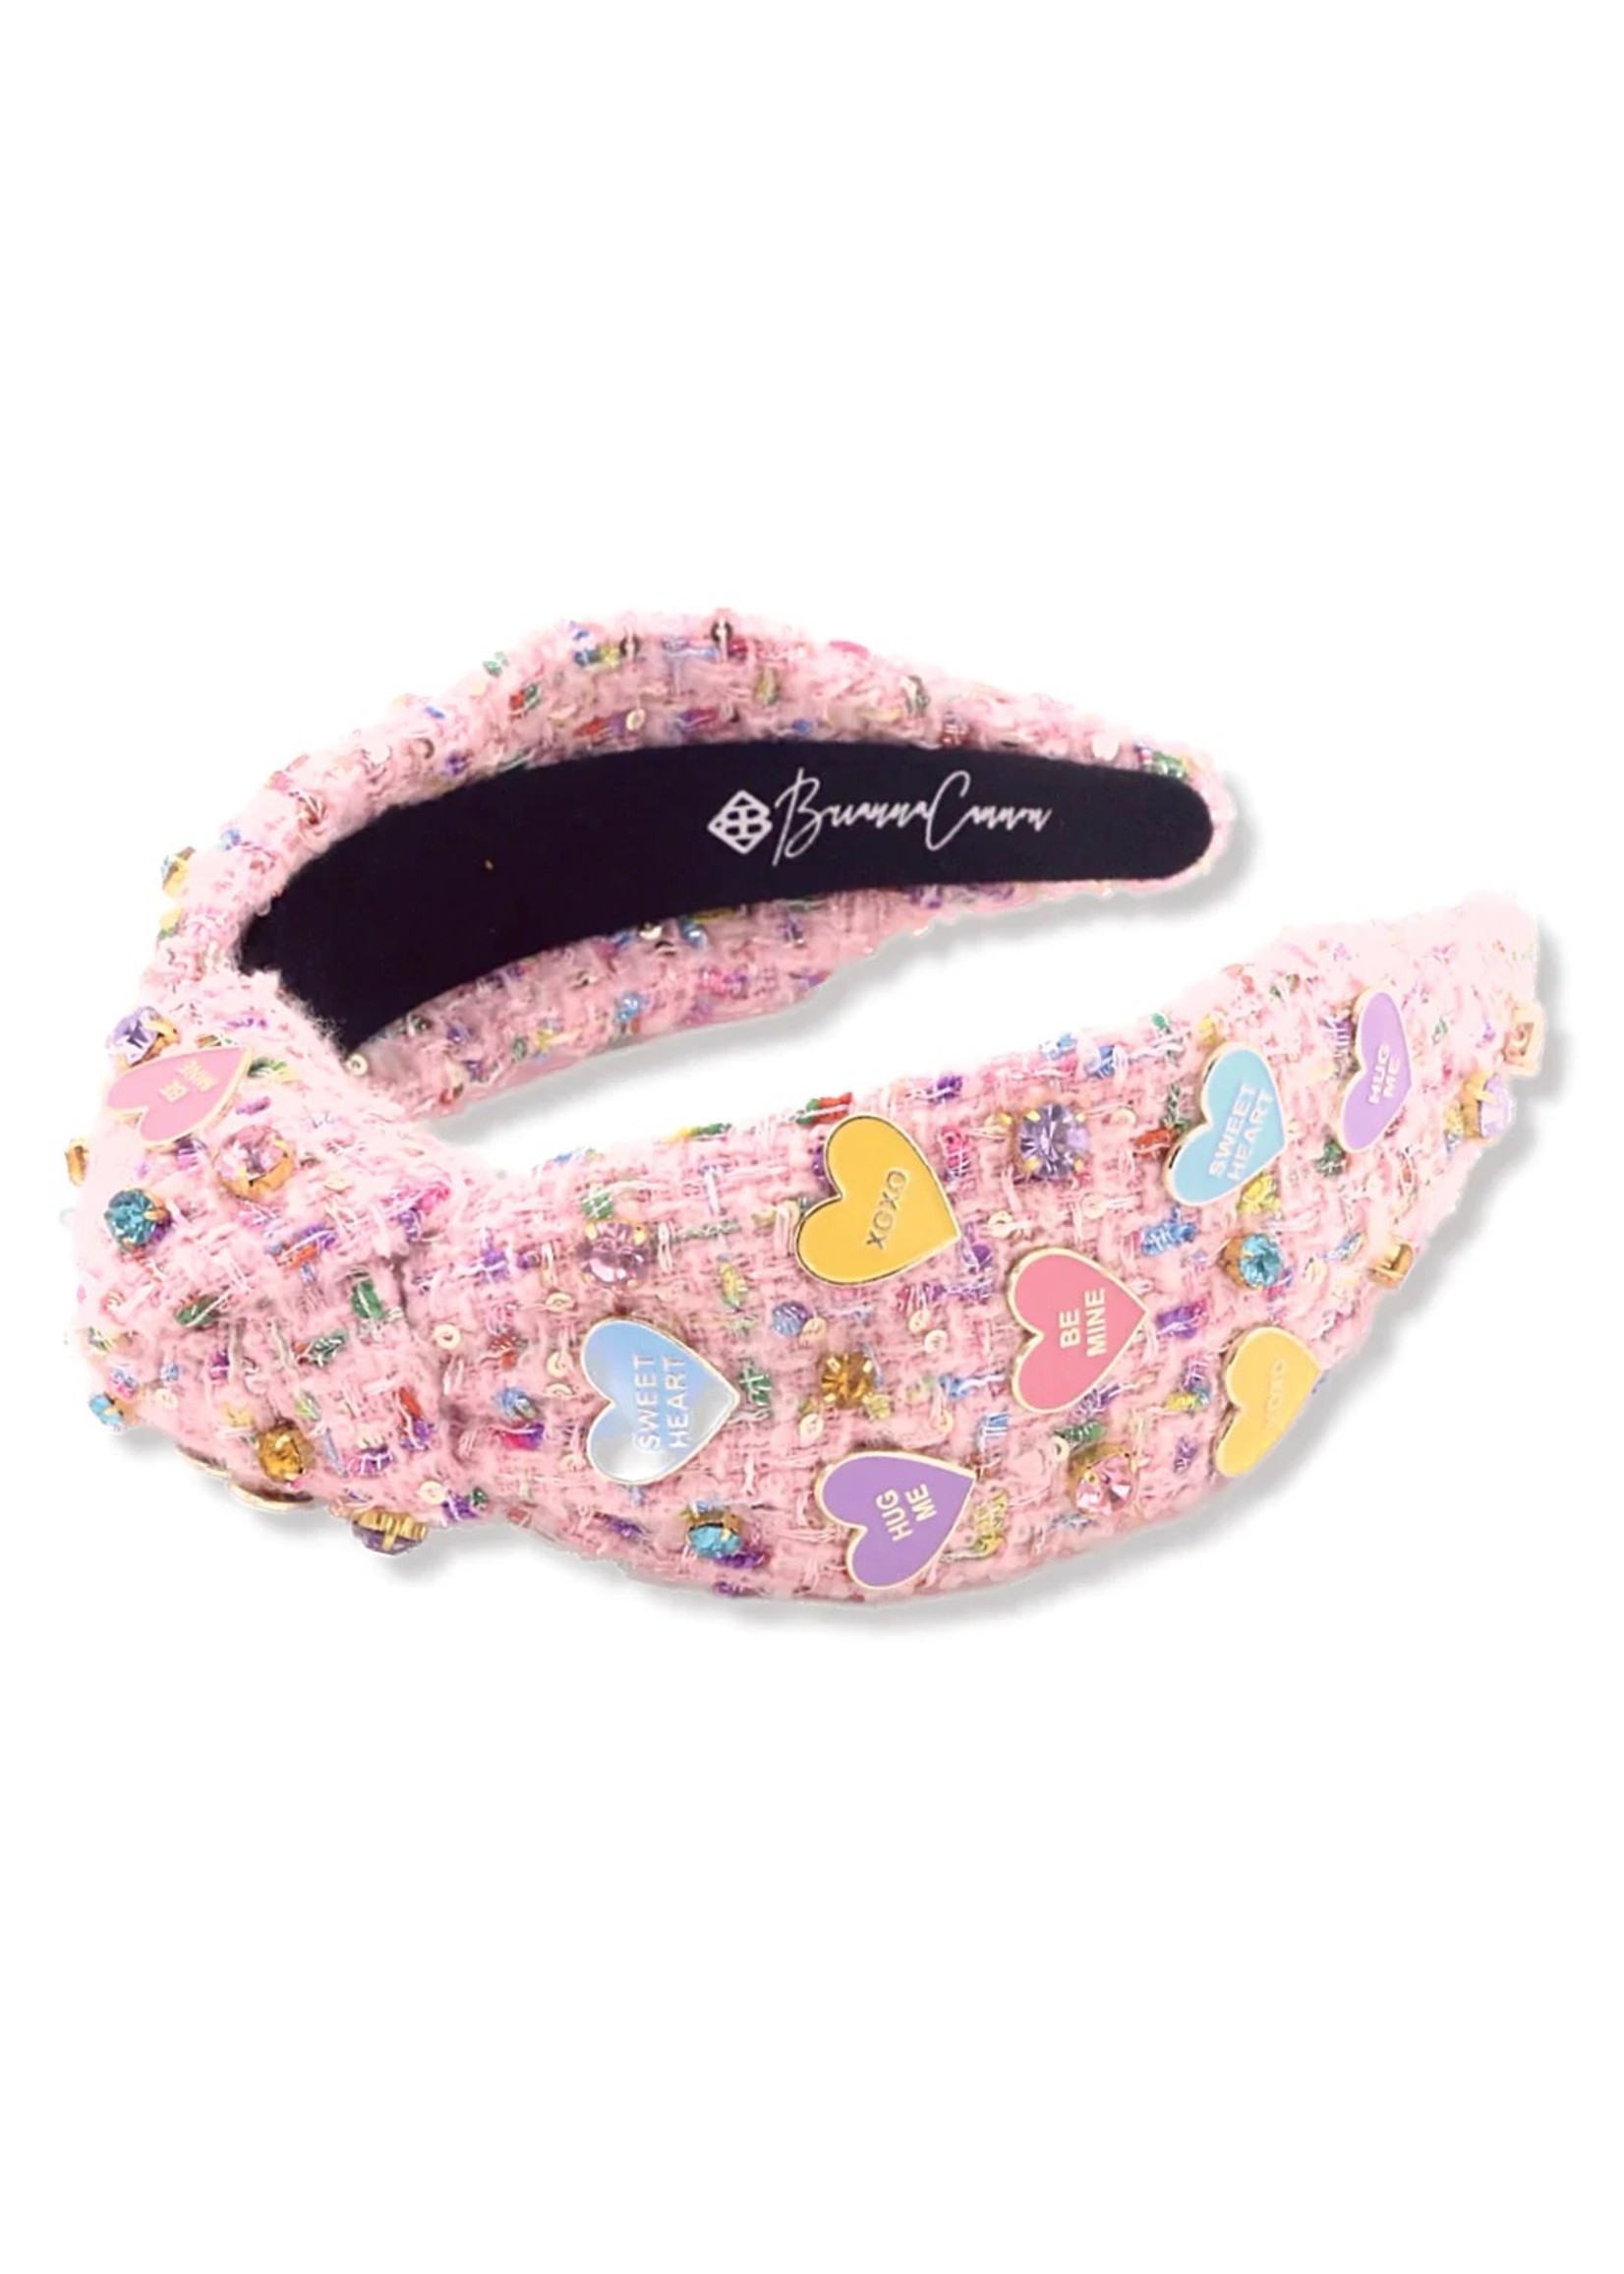 Brianna Cannon Adult Size Heart Candy Tweed Headband with Crystals